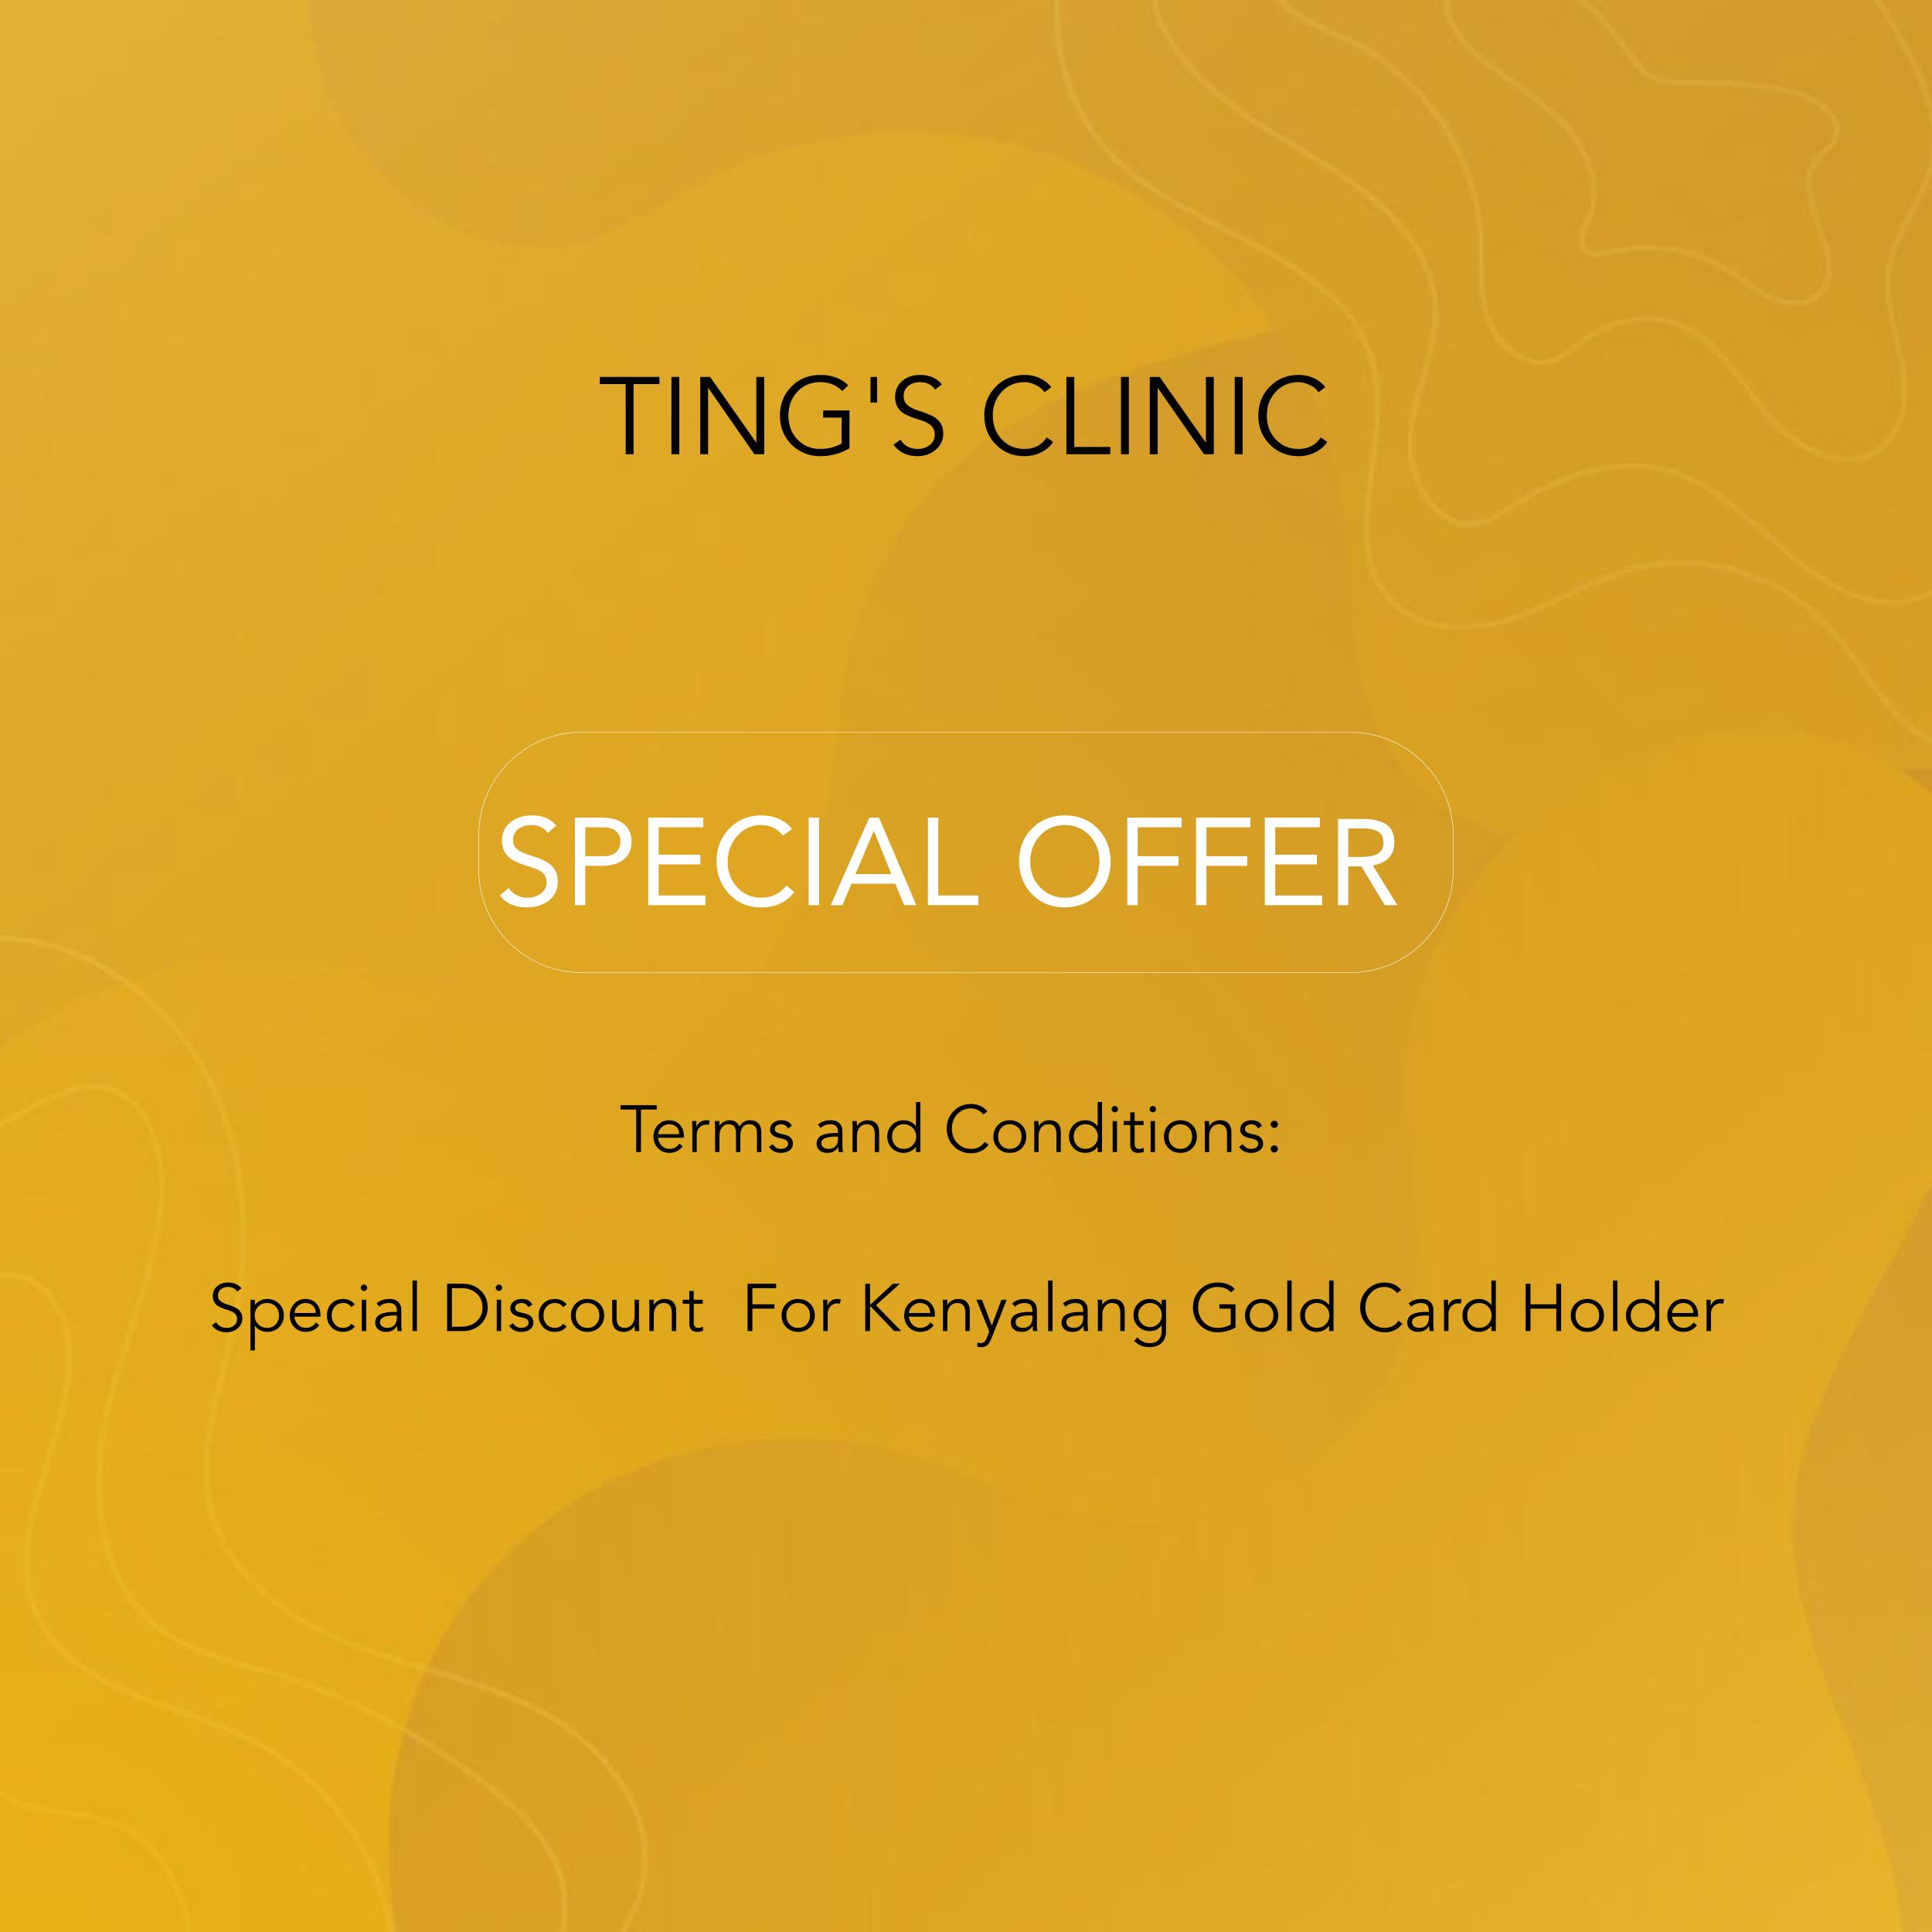 TING'S CLINIC